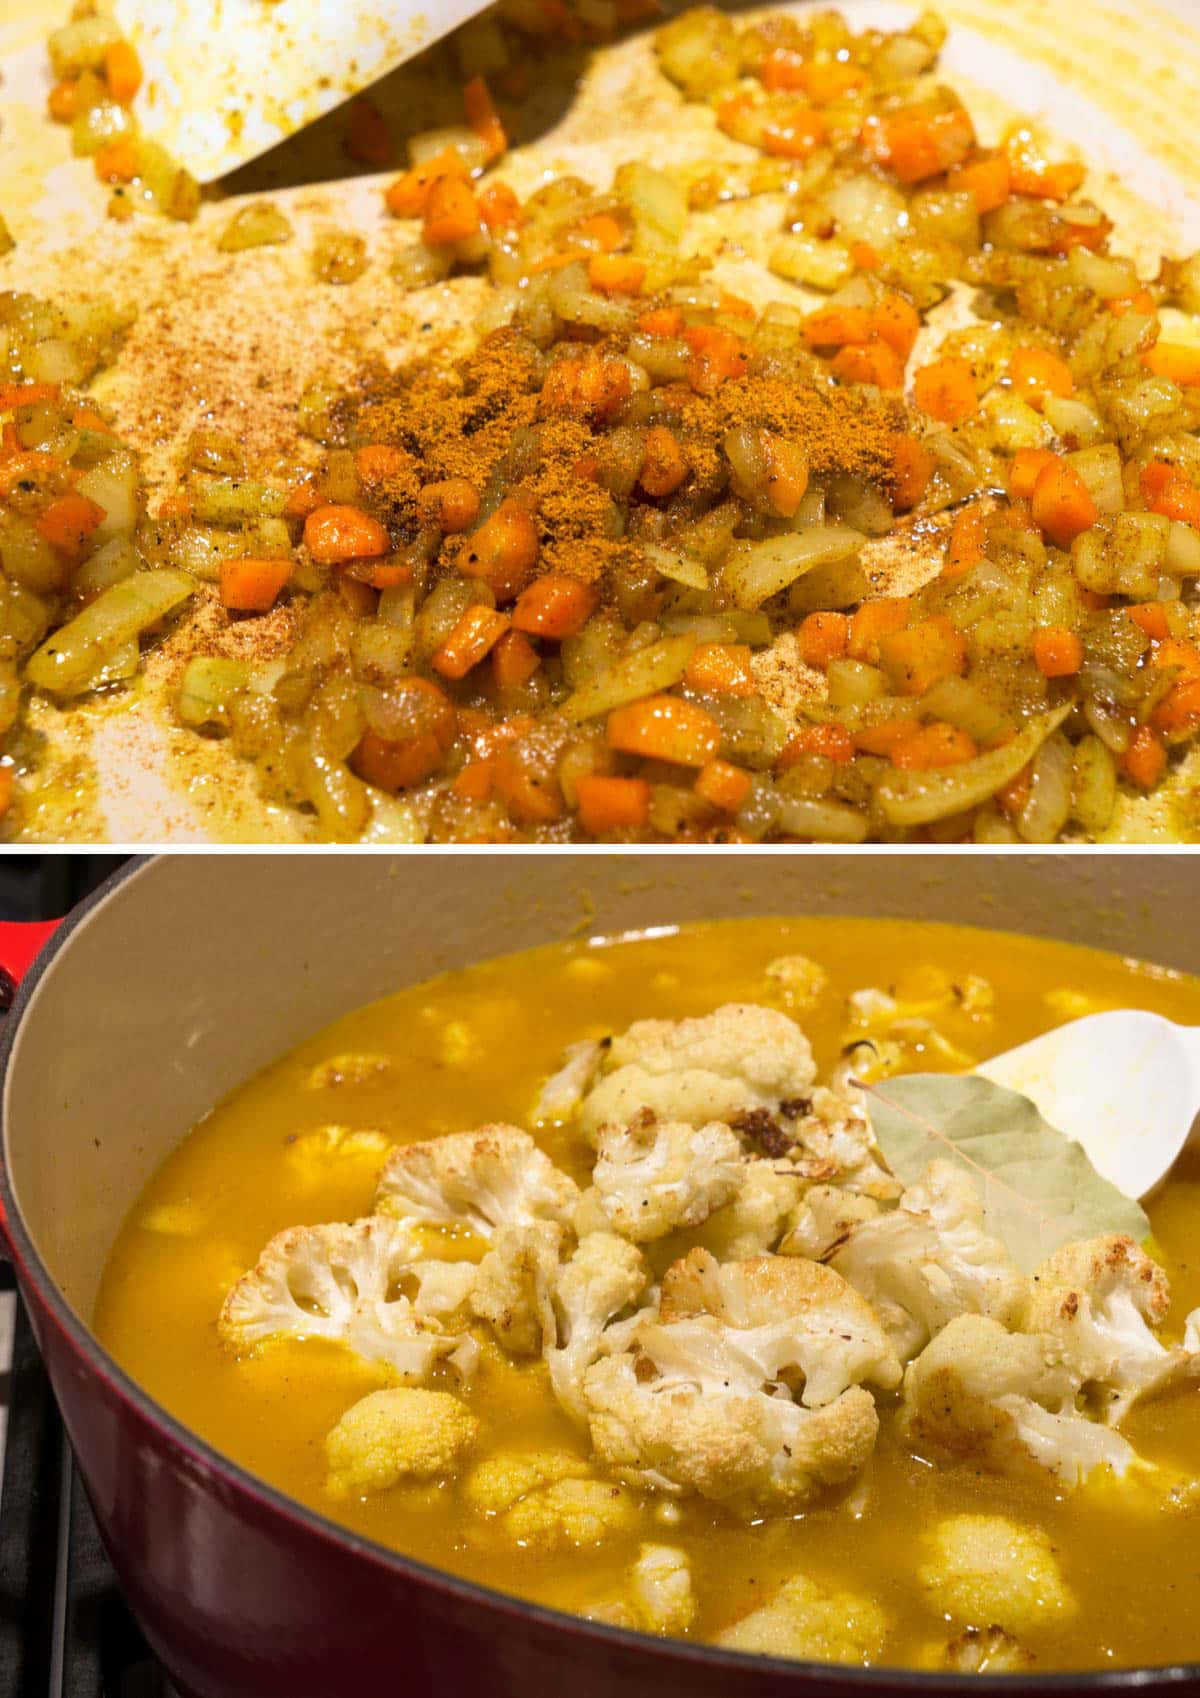 collage of 2 photos - top shows carrots and onions sauteed with curry powder in a pot, bottom shows cauliflower added to a pot of soup